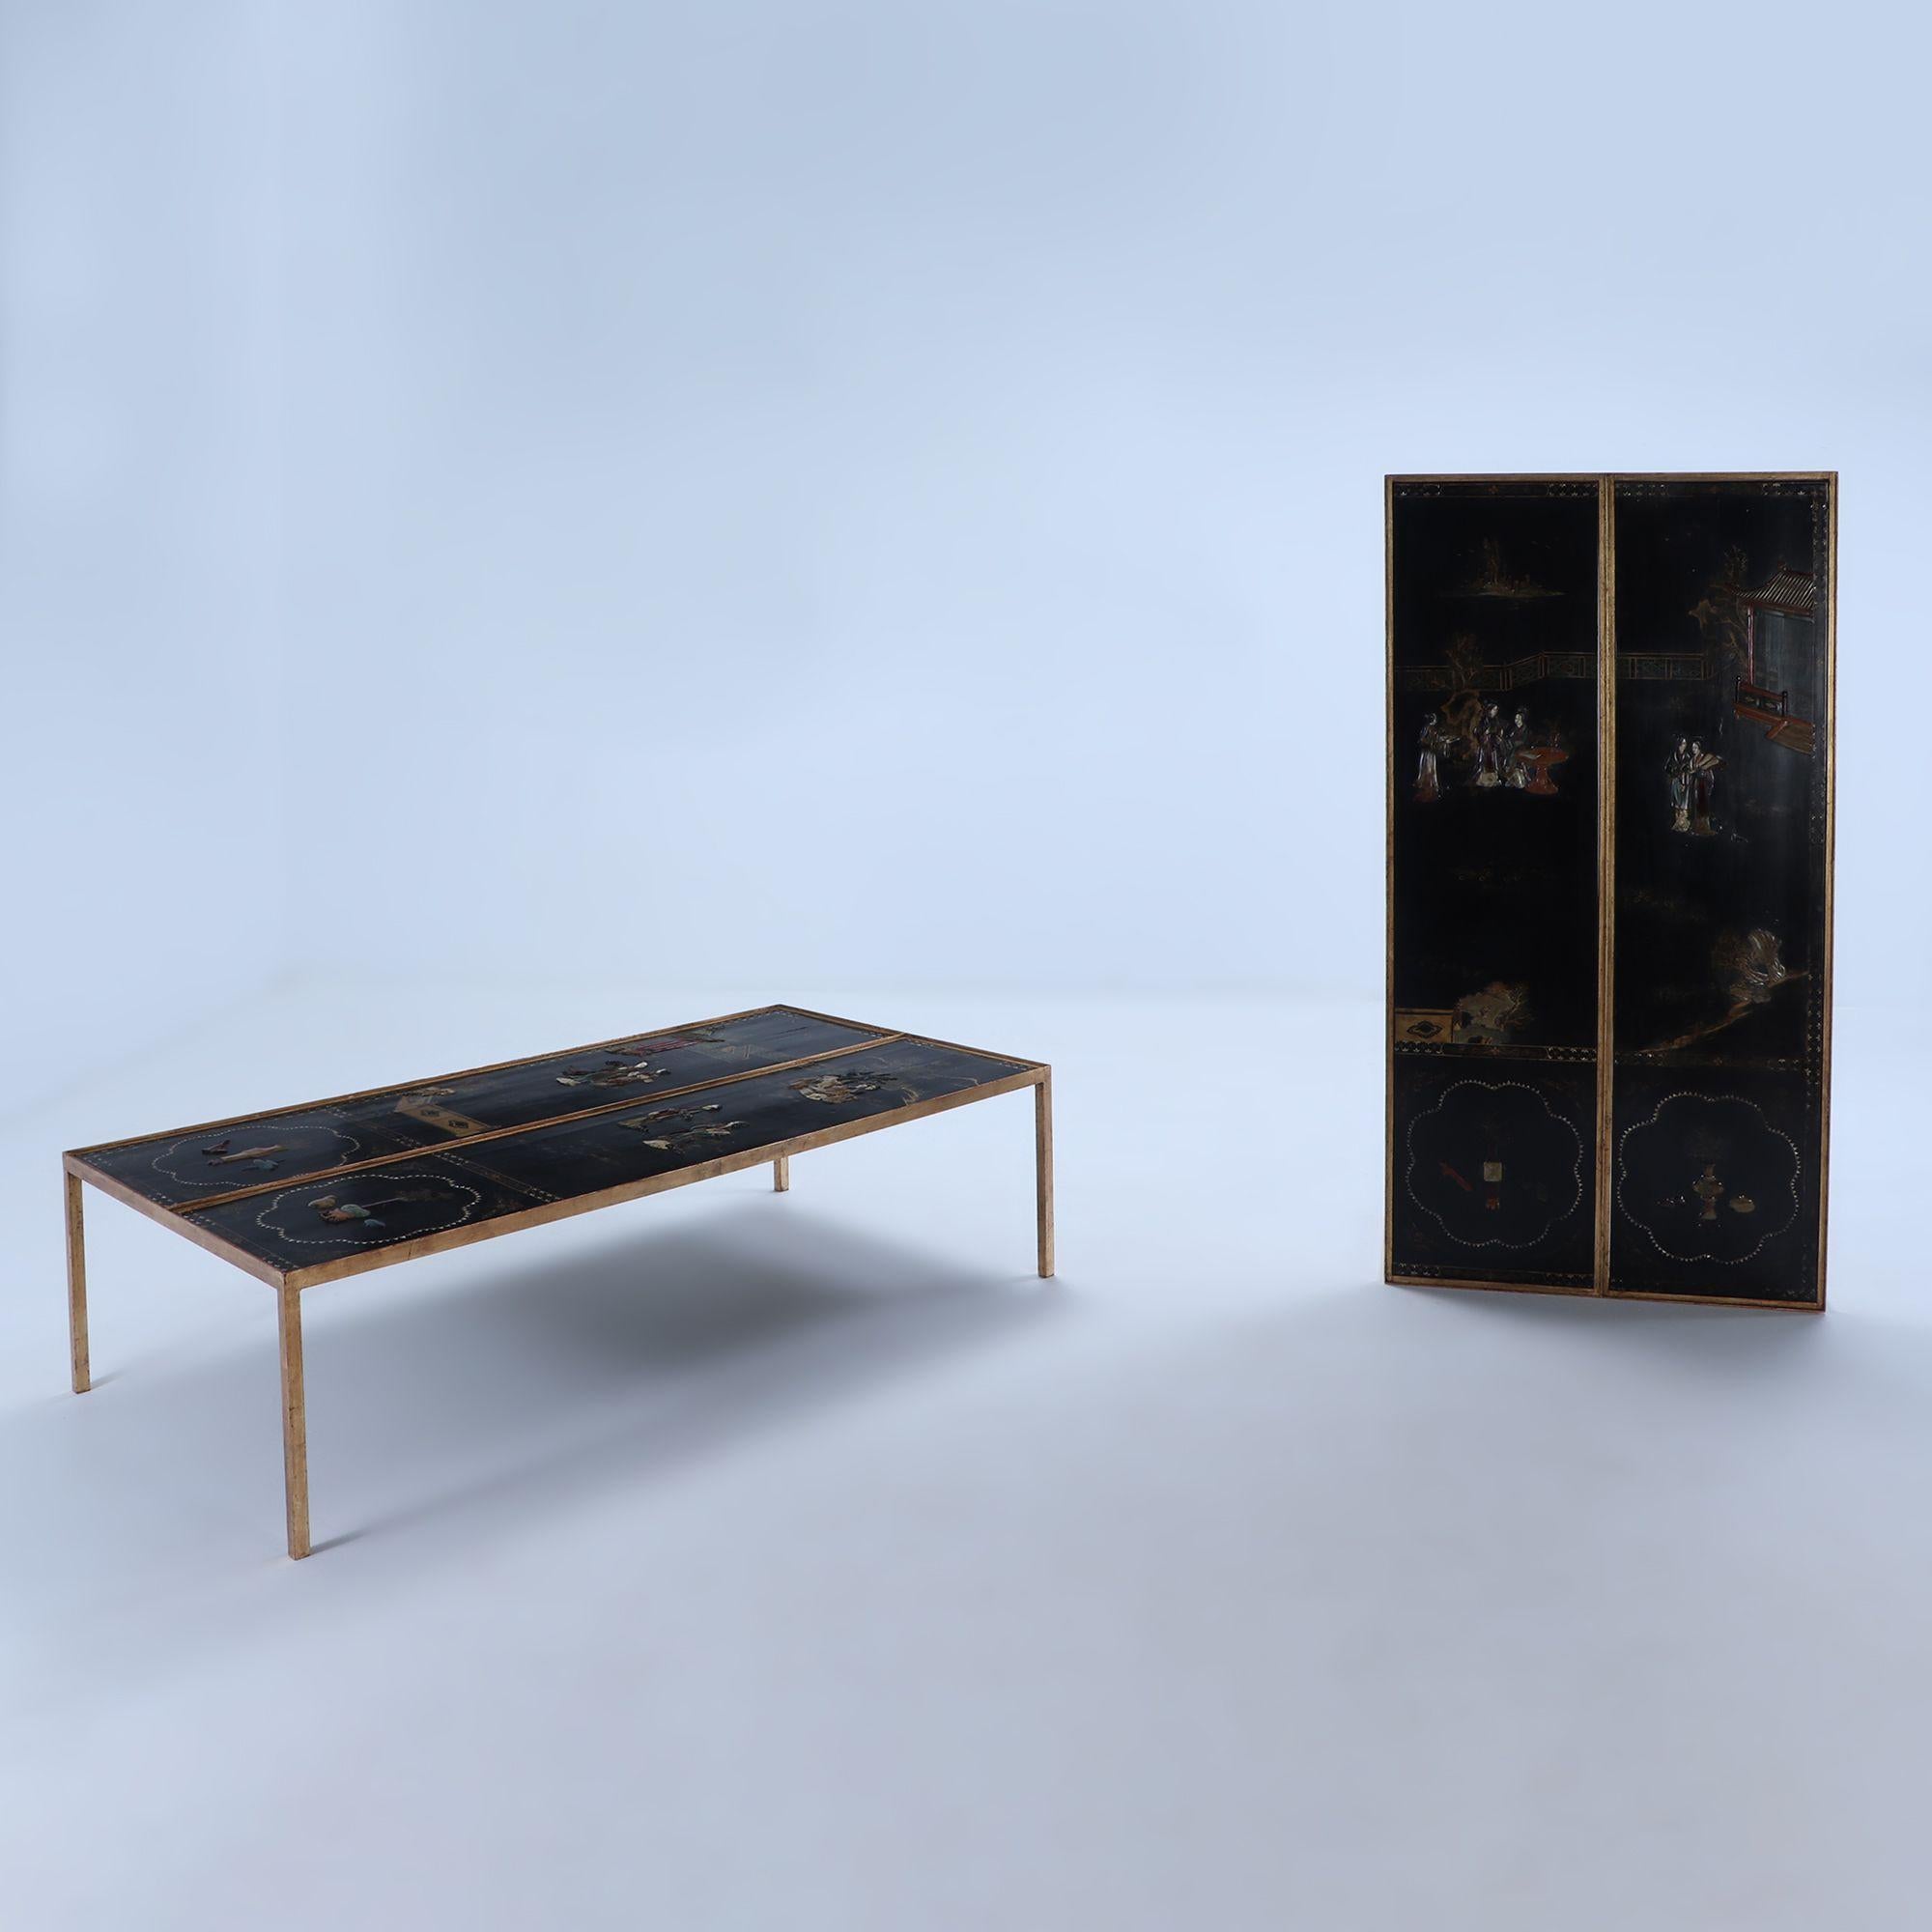 A pair of gilt iron and wood coffee tables with glass tops (not shown) having Chinese lacquered wood inserts C 1940. The two can be used individually and they measure approximately 34